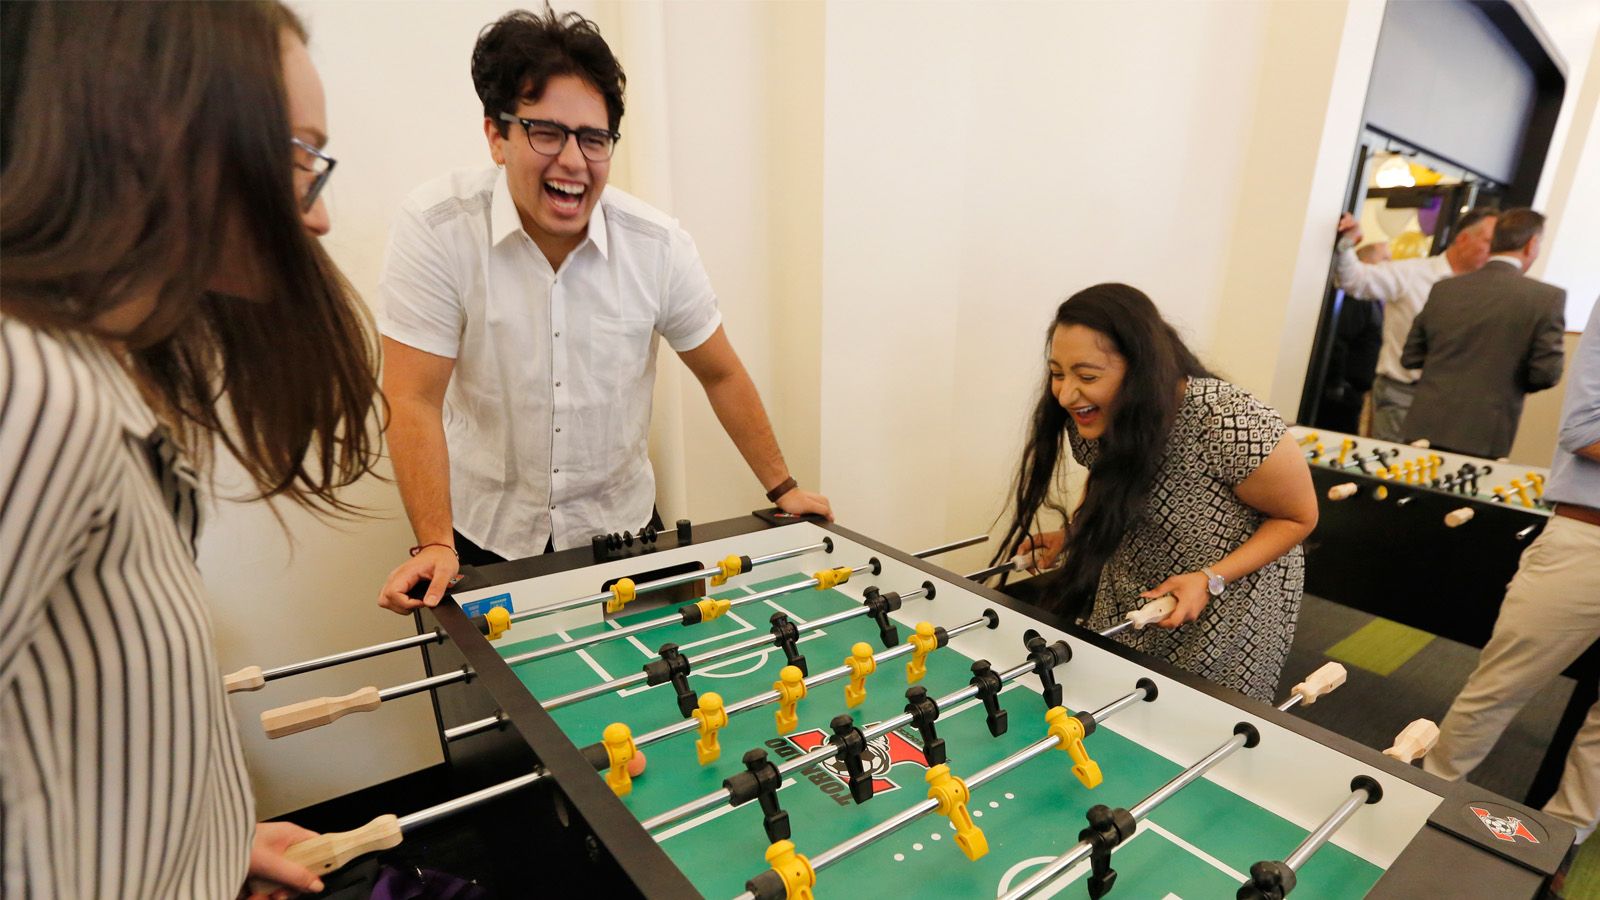 Students playing fussball